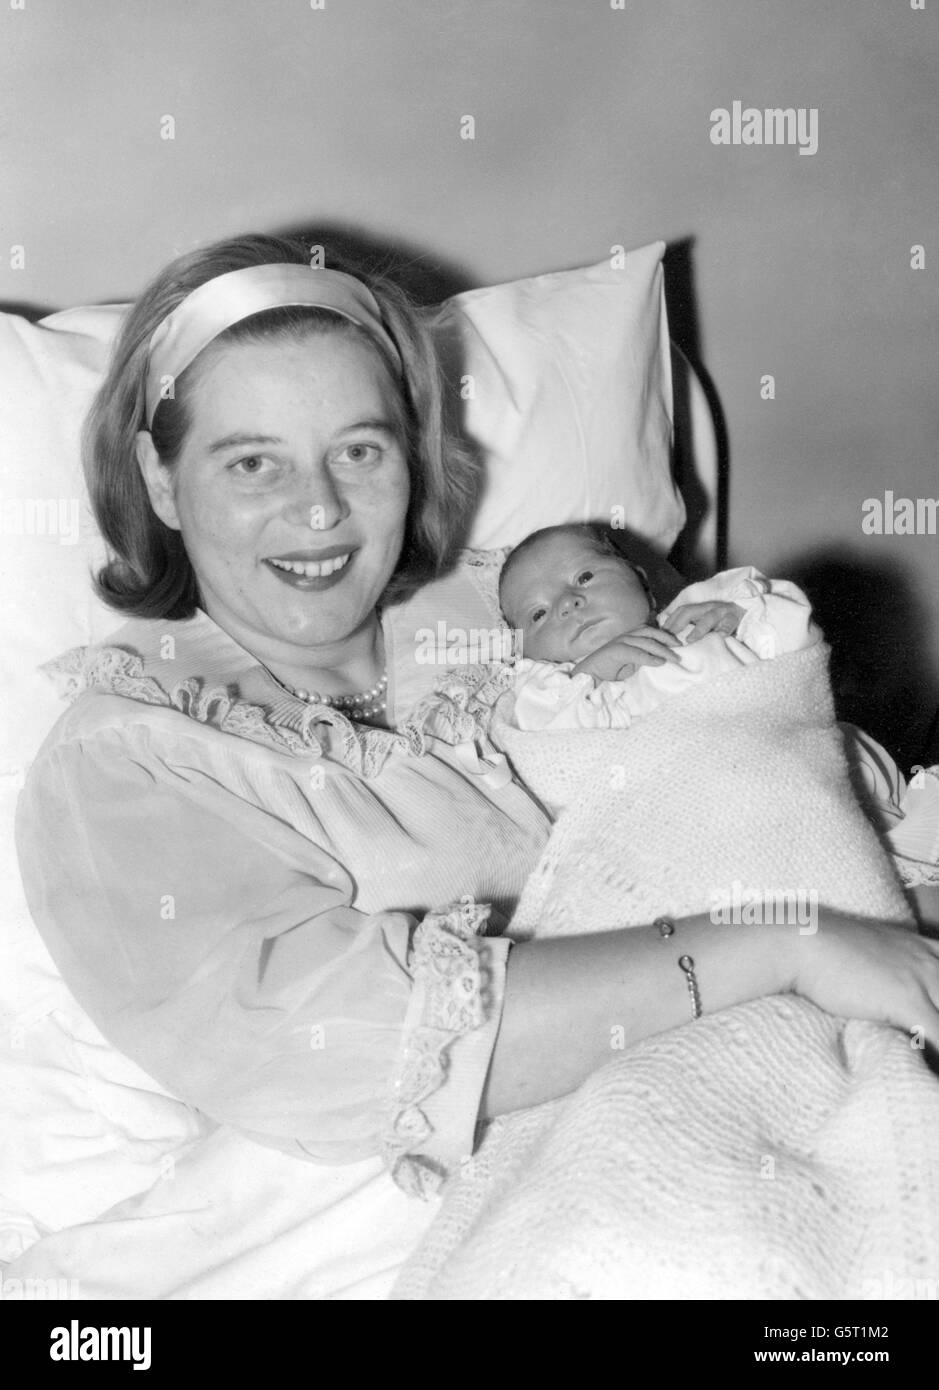 Princess Tomislav of Yugoslavia with her baby daughter Princess Katarina at King's College Hospital, Denmark Hill, London, where she was born last Saturday. The Princess, formerly Princess Margarita of Baden, is the niece of the Duke of Edinburgh. She and Princess Tomislav of Yugoslavia were married in June 1957. Stock Photo